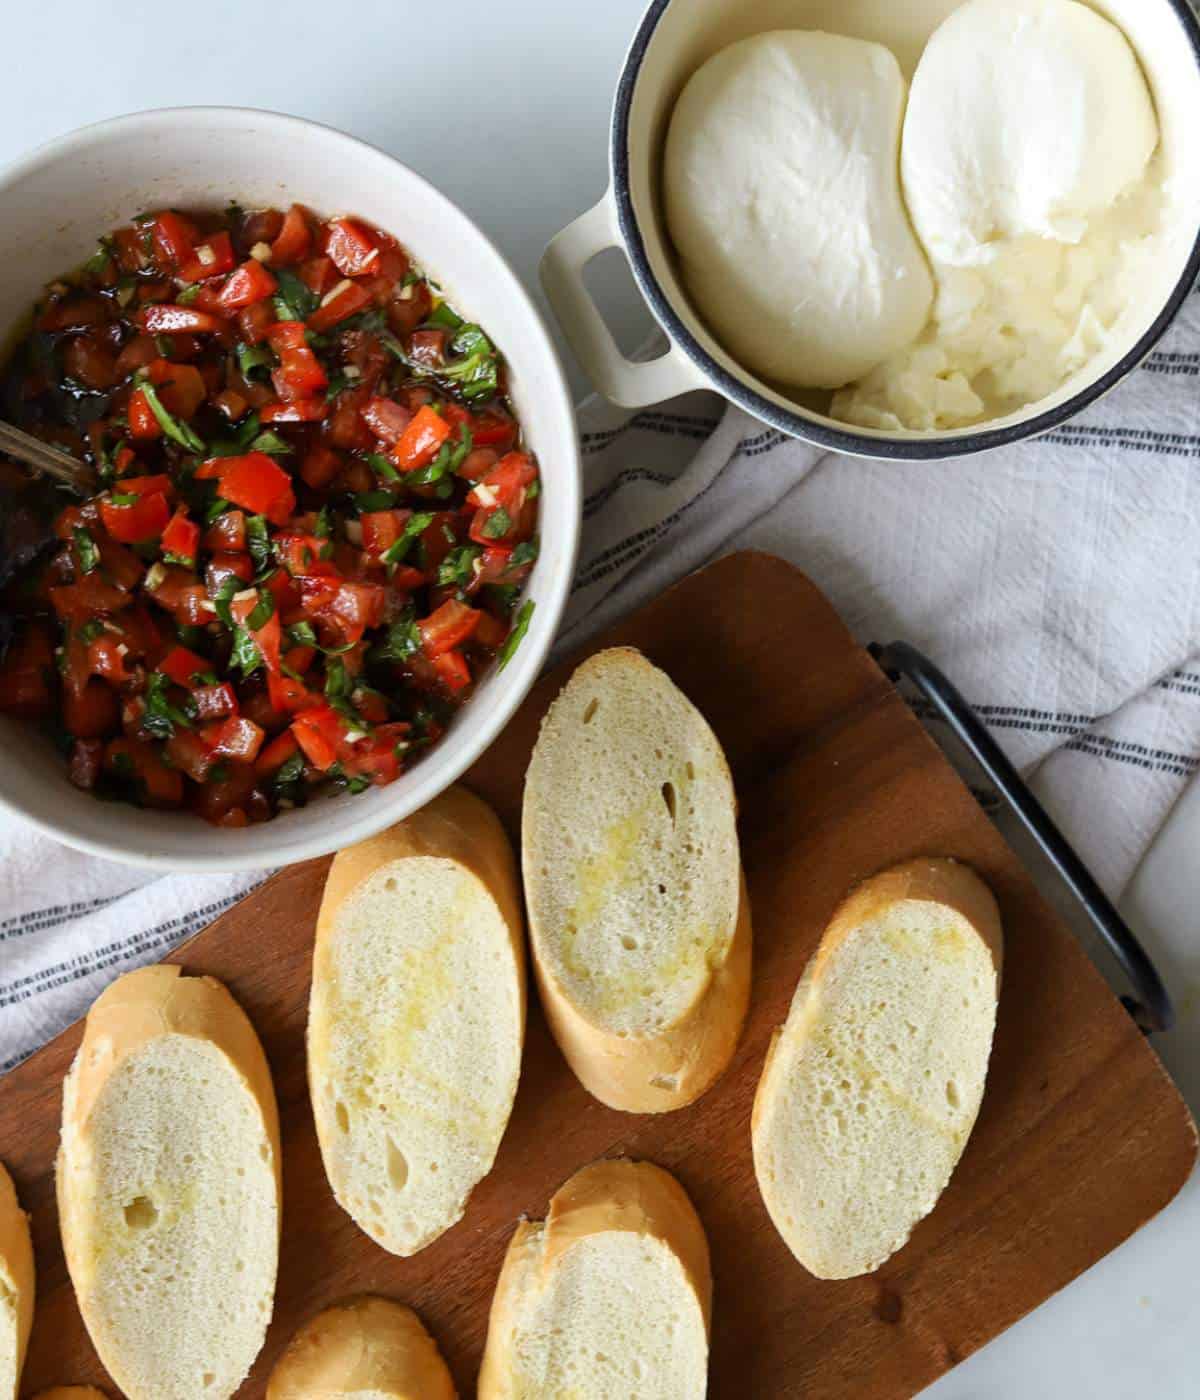 Bruschetta, french bread and burrata on serving dishes.